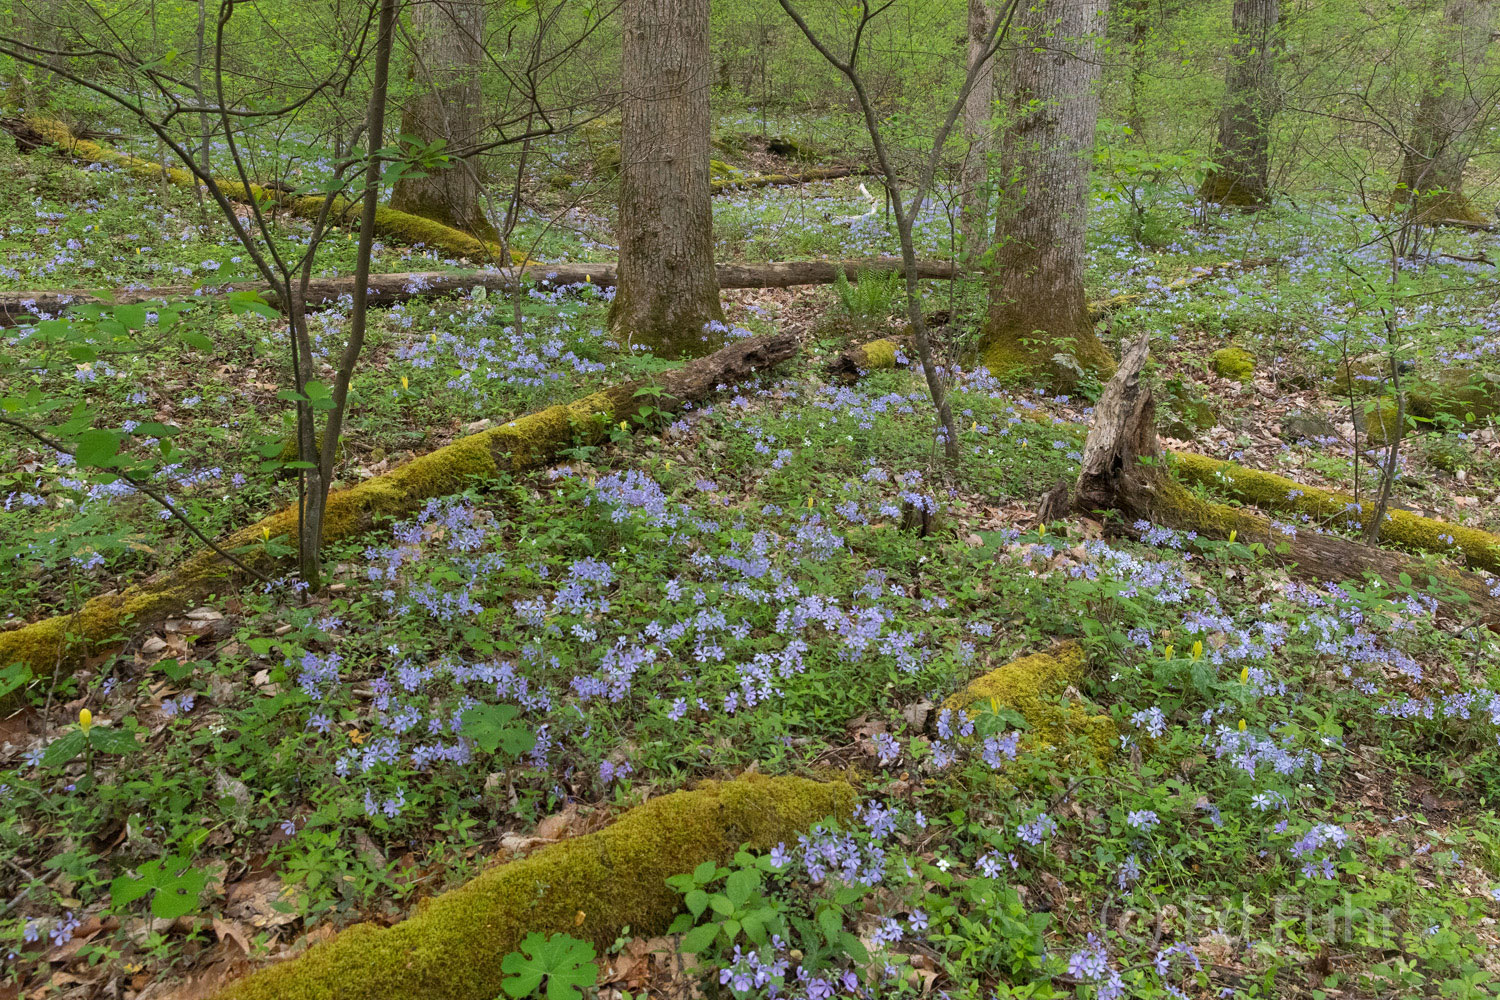 Woodland phlox blooms amidst the moss-covered timbers in Great Smoky Mountains.